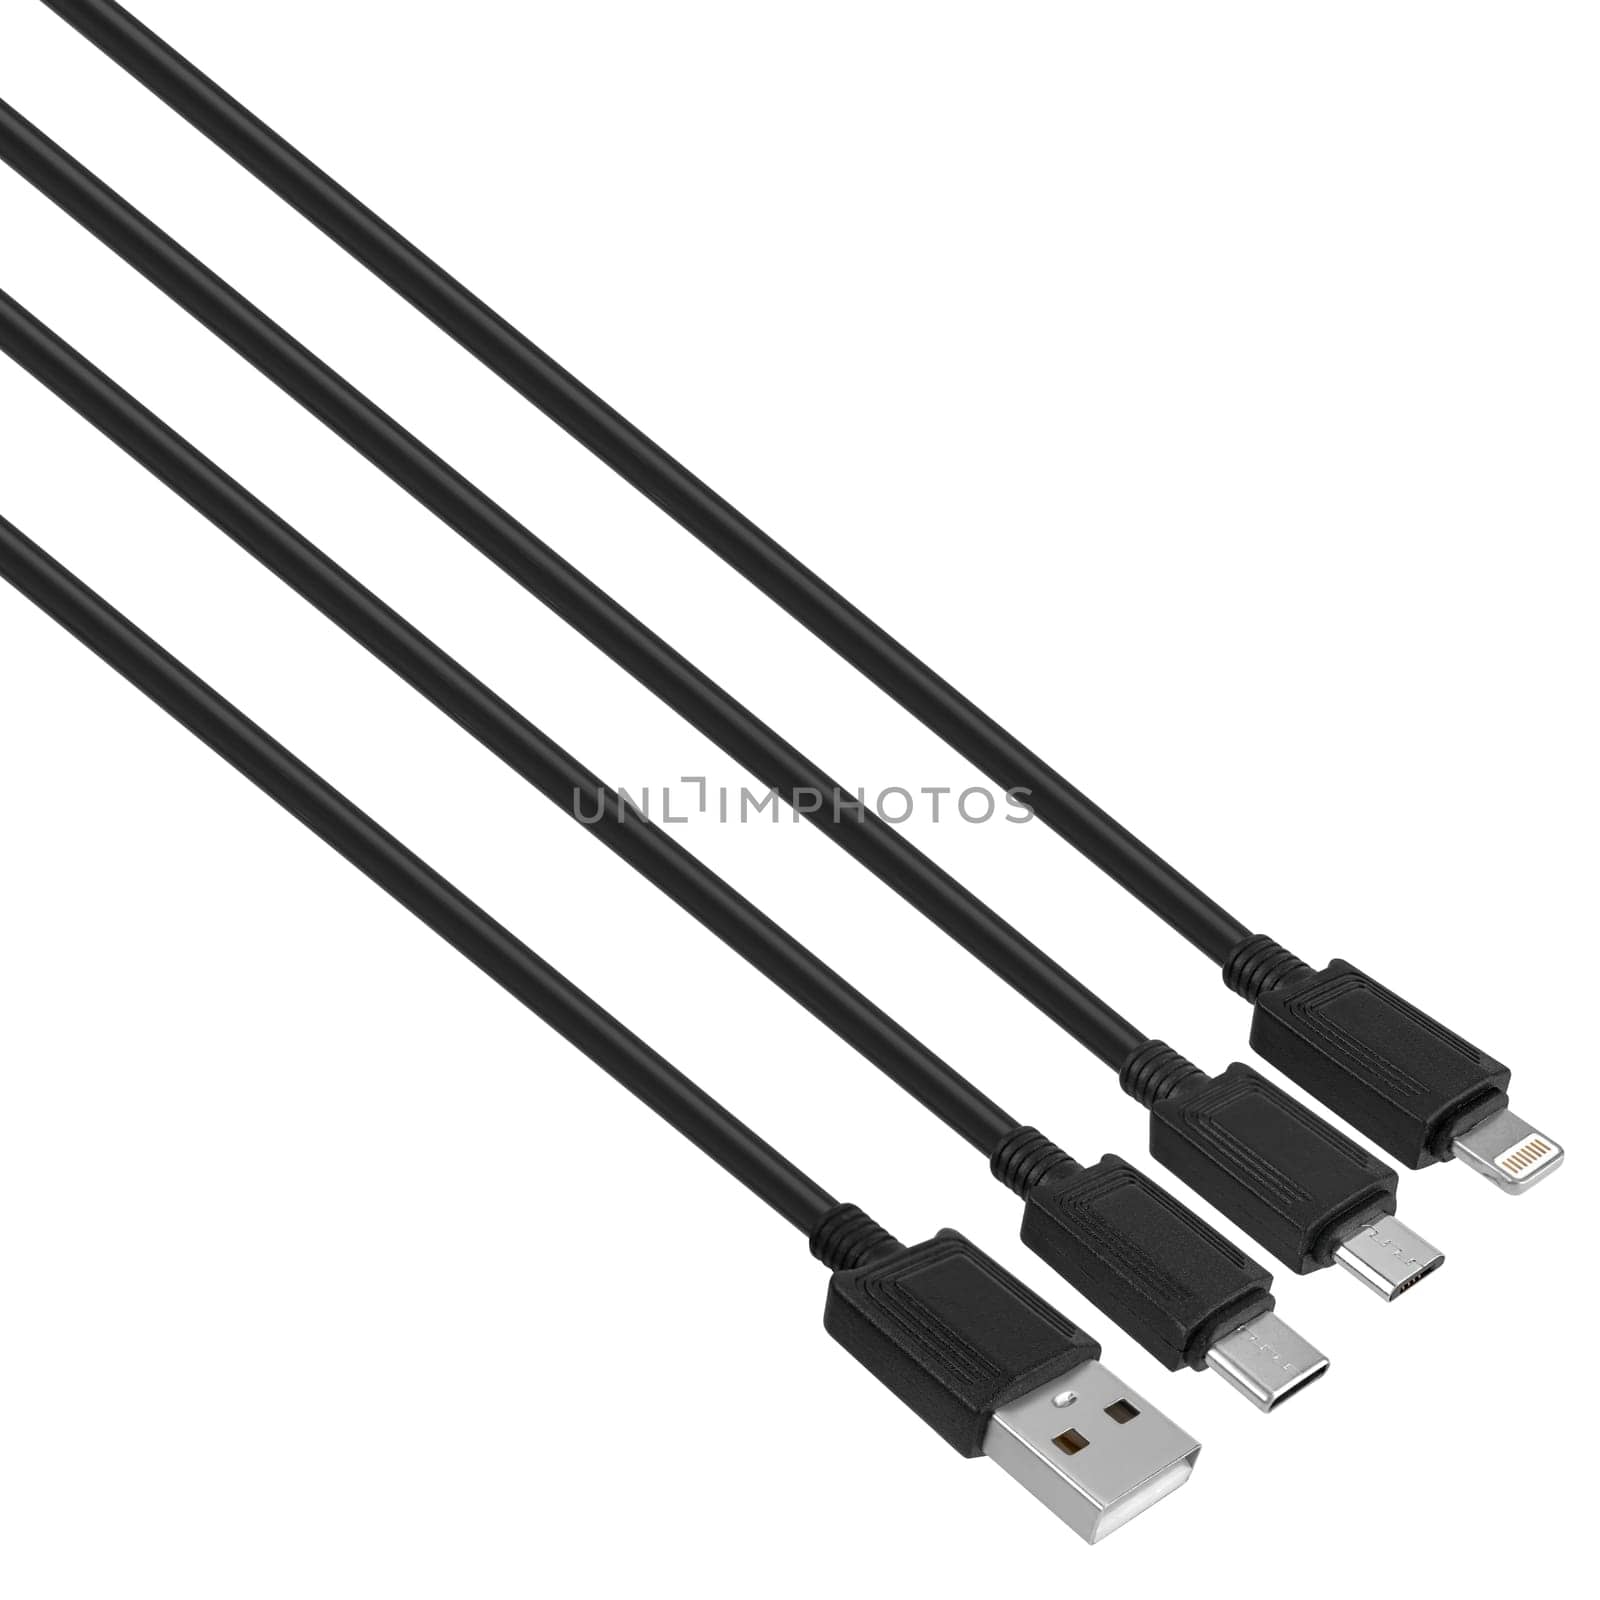 cable with Type-C, micro USB, Lightning and USB connectors by A_A